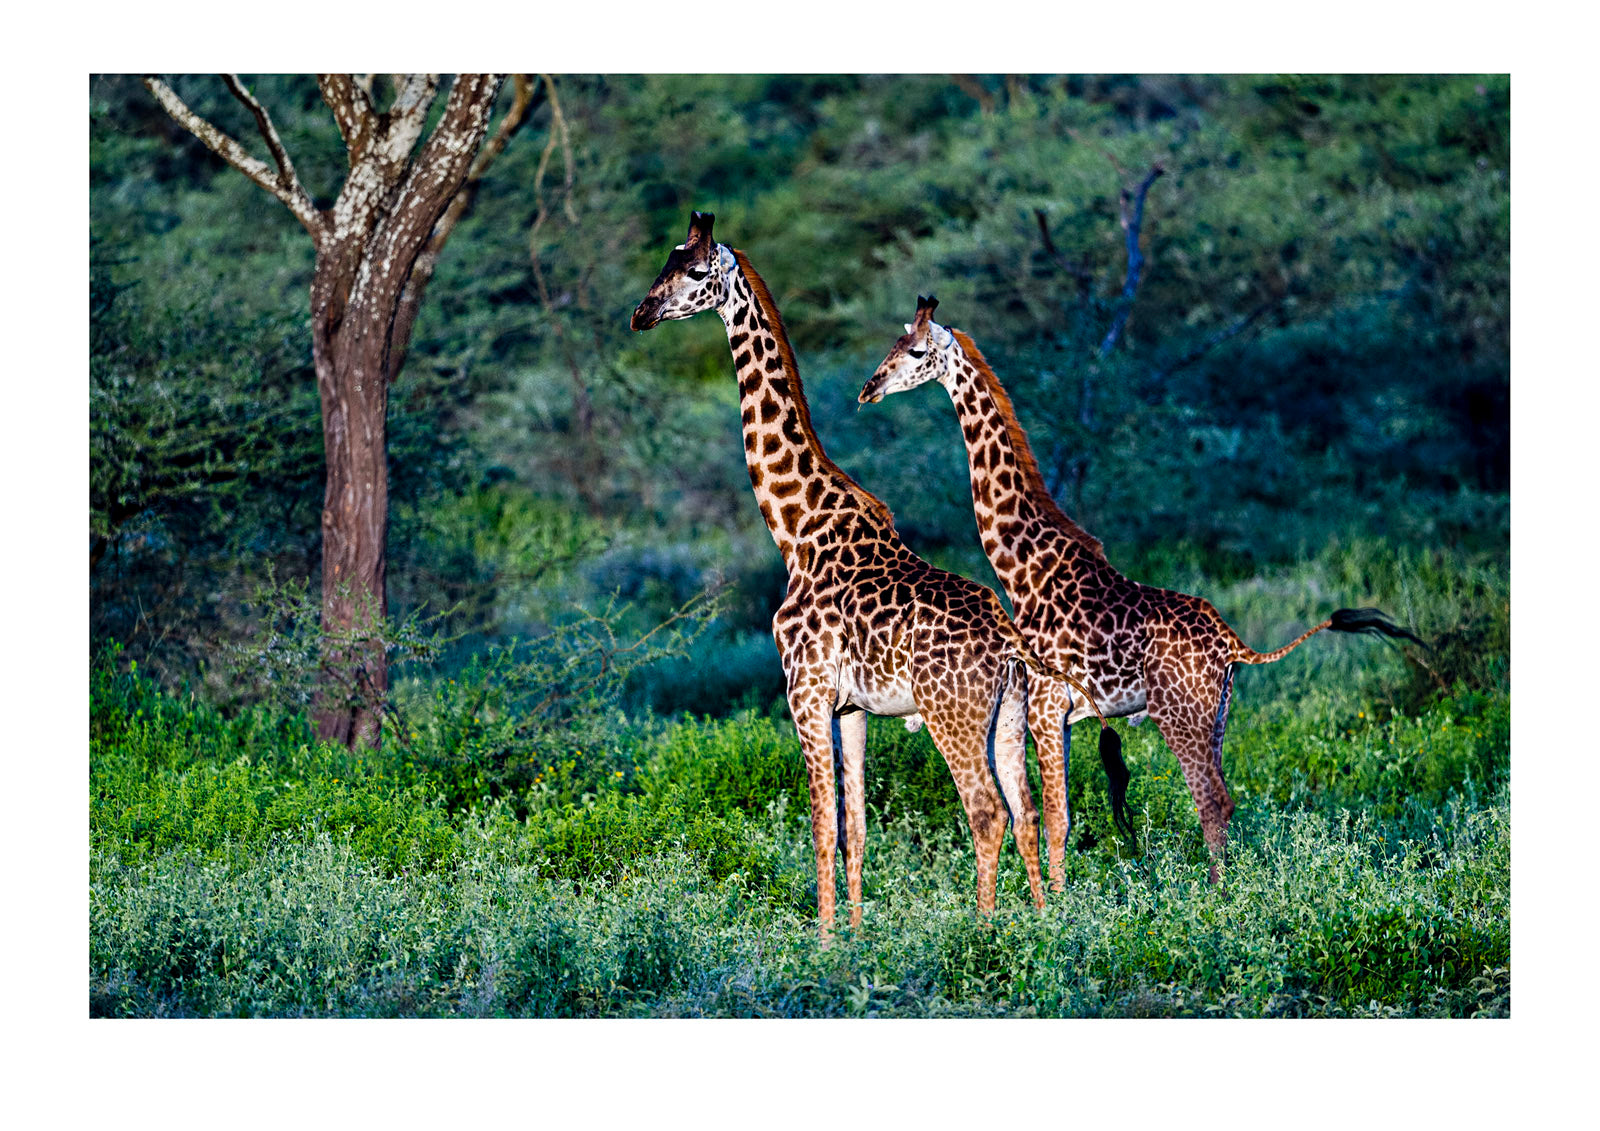 A pair of Giraffe watch a pride of lion as they move through a lush woodland. Eventually the adolescent cubs chased the giraffe for fun, setting them off at a loping gallop.  Ndutu, Serengeti National Park, Tanzania